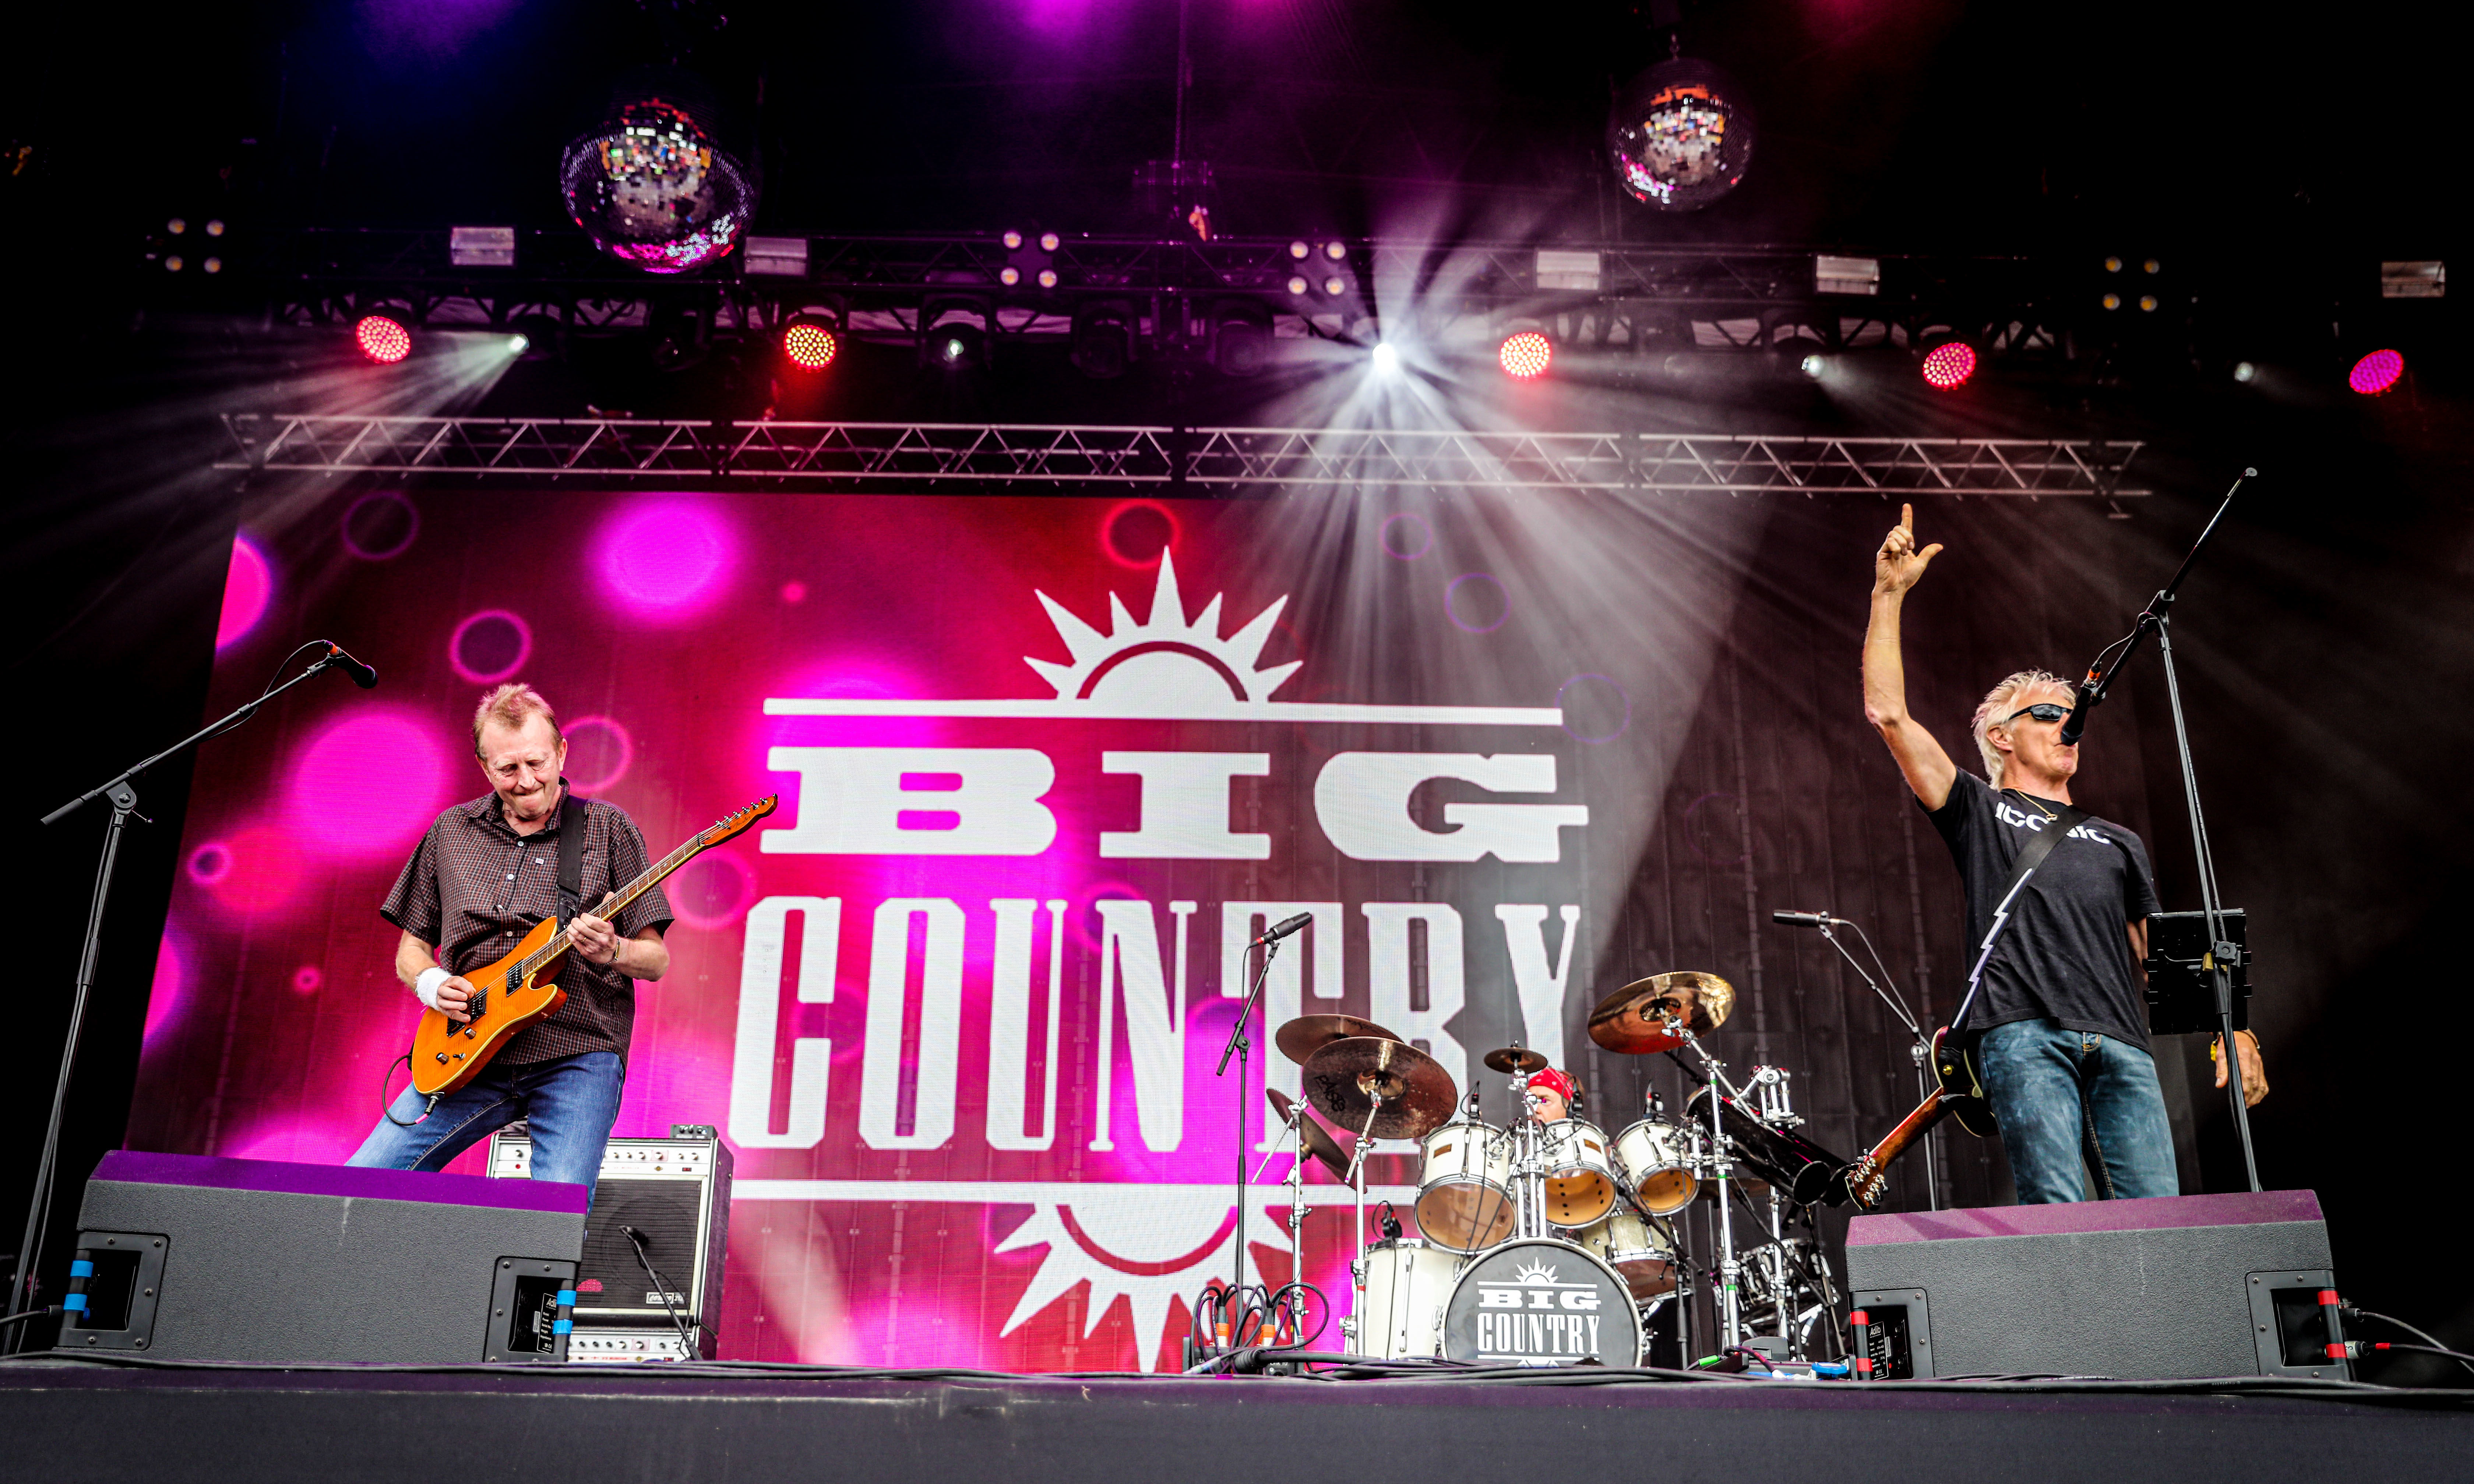 Big Country gave a stomping Sunday performance at Rewind this year.